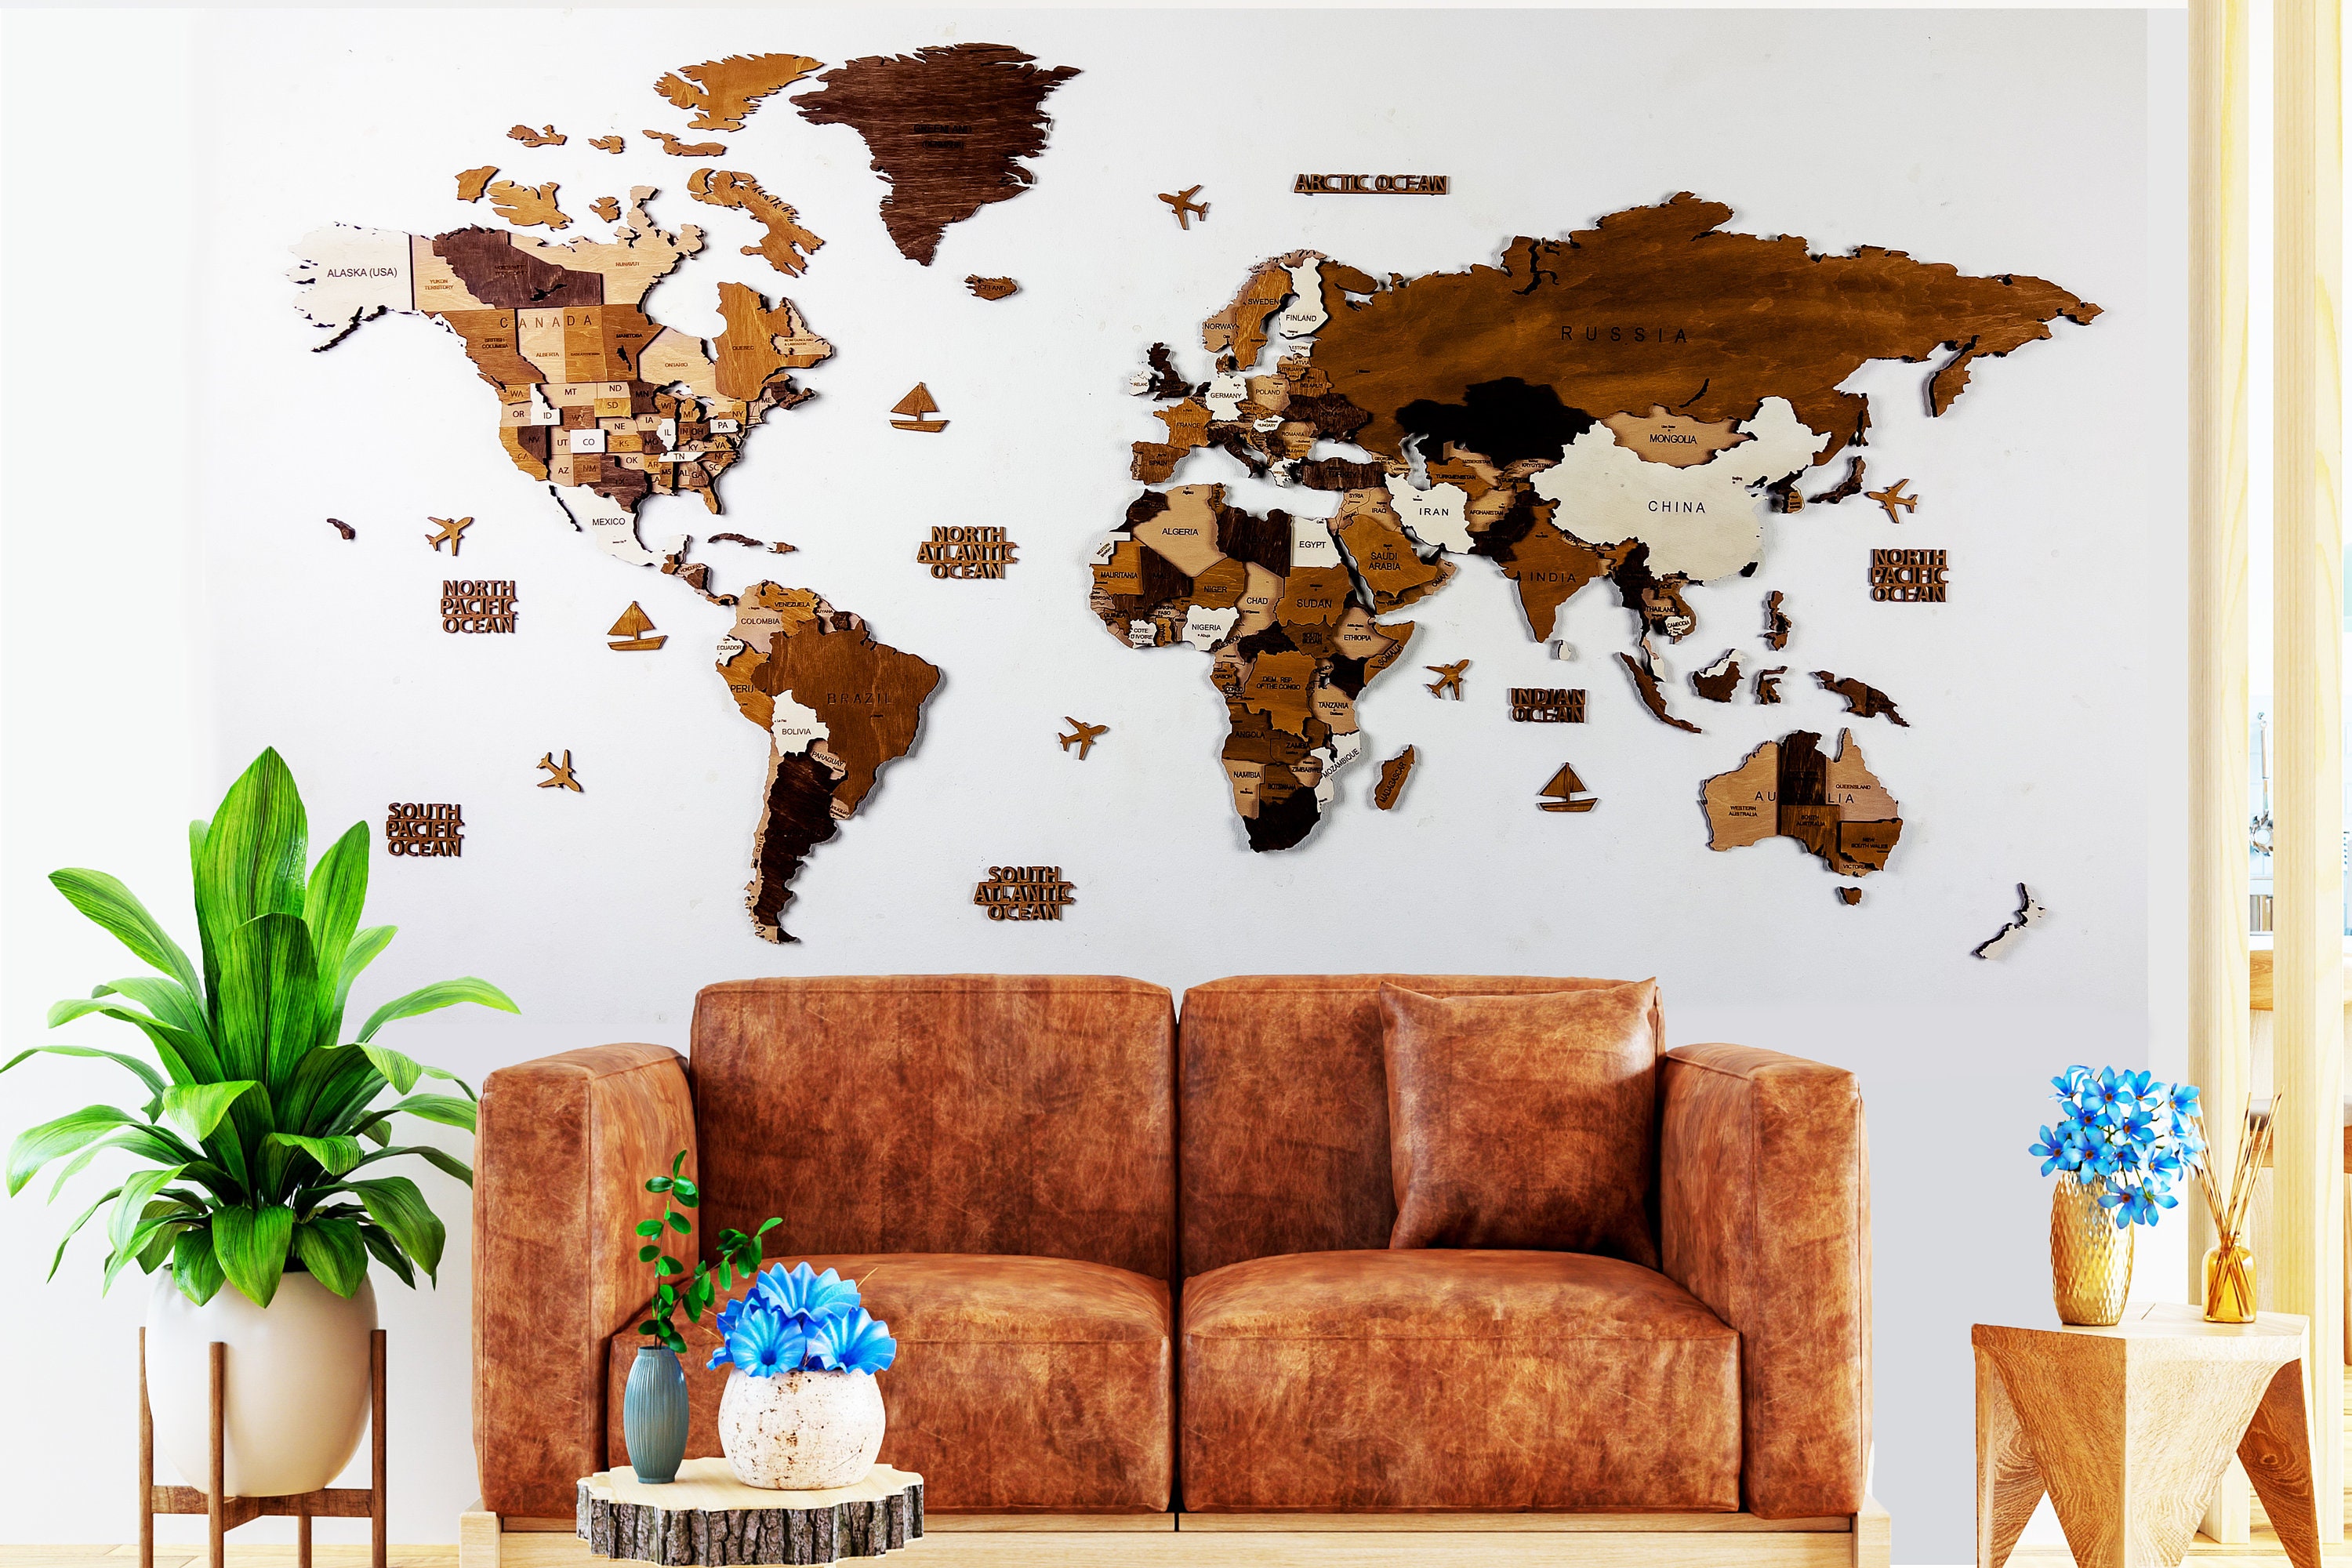 30 SHAPES GLASS PRINTS Picture WALL ART Map World Wood UK 3042 